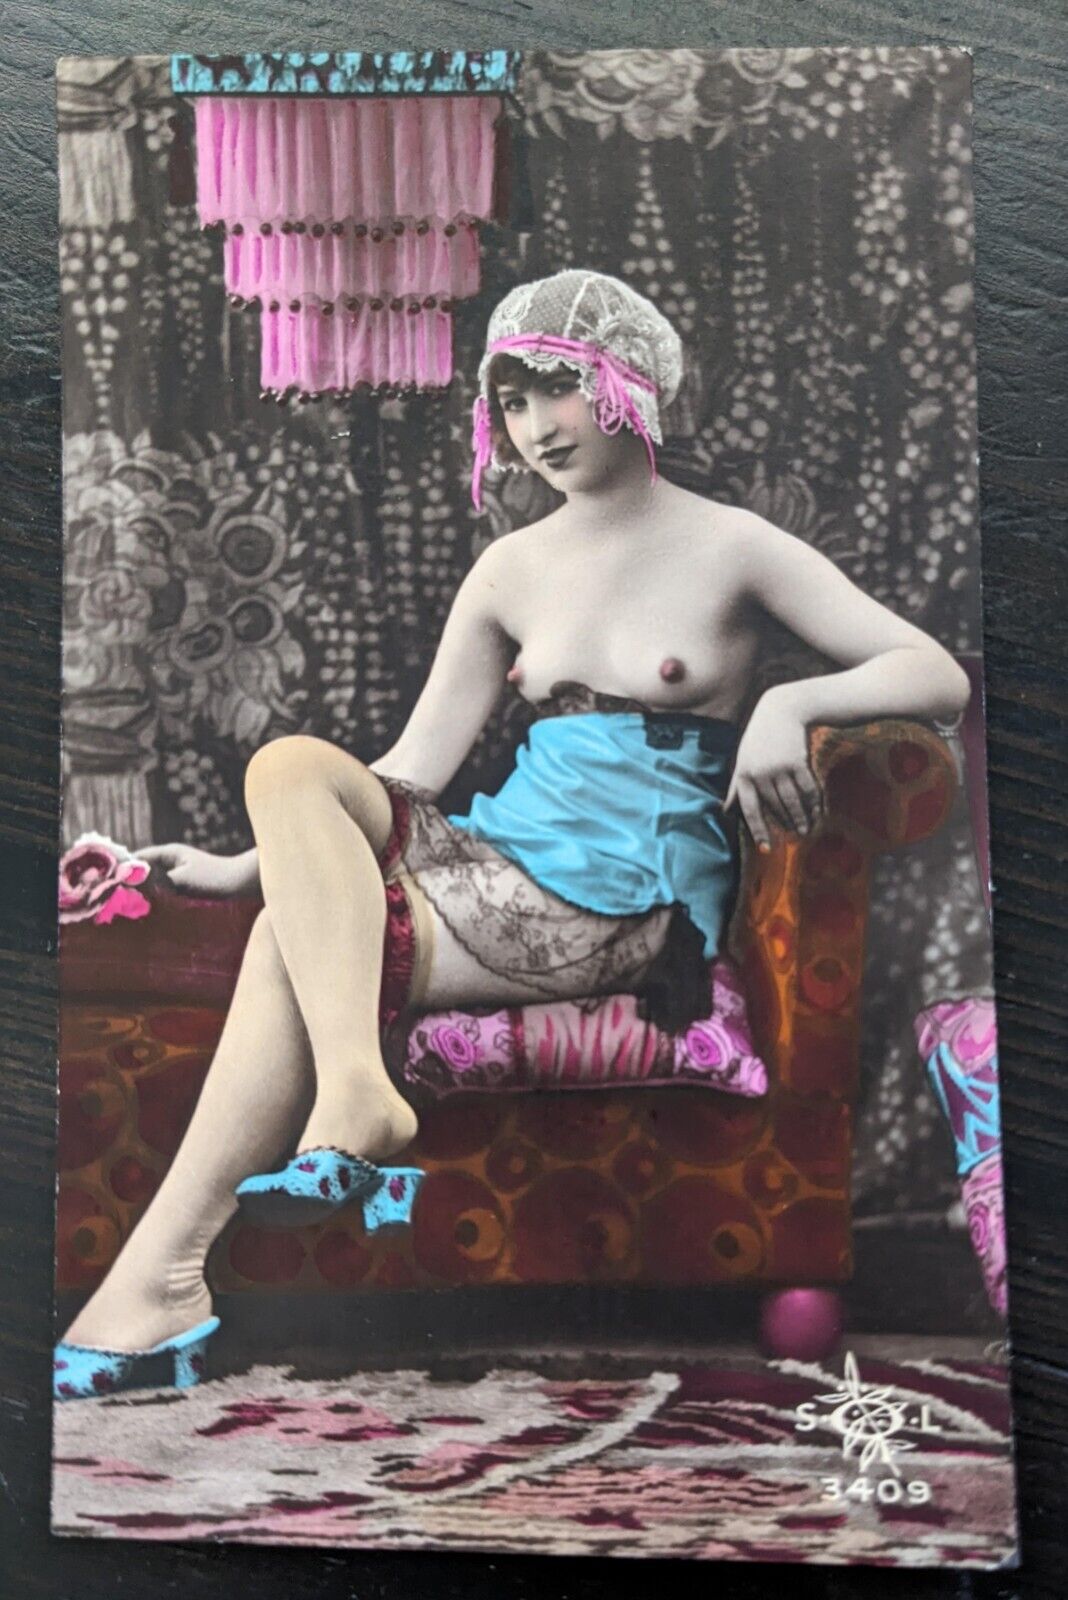 Risque French Hand Tinted Nude SOL #3409 Great Colors Real Photo Postcard RPPC